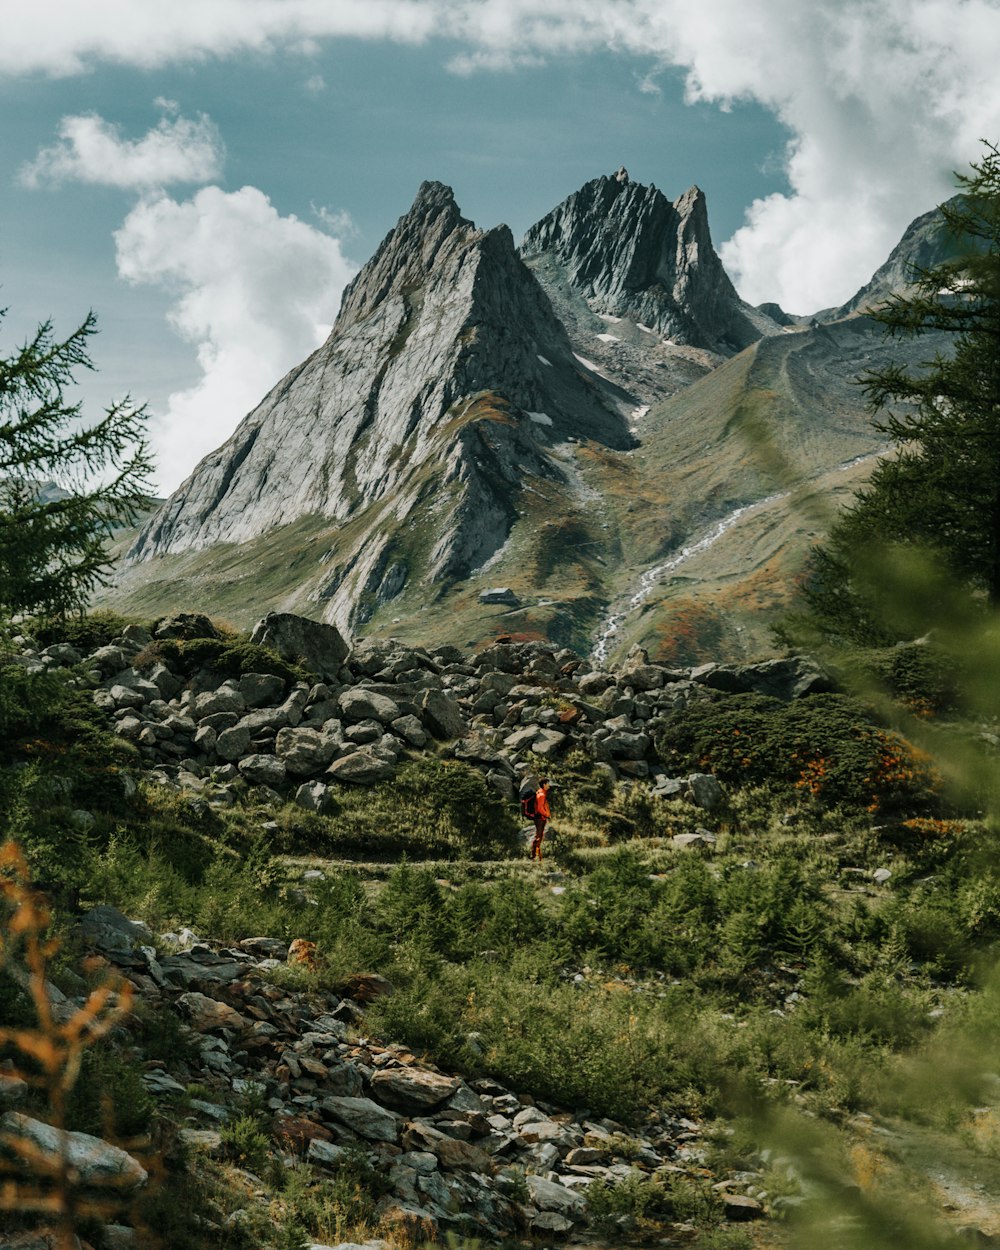 a person walking on a rocky path in front of a mountain